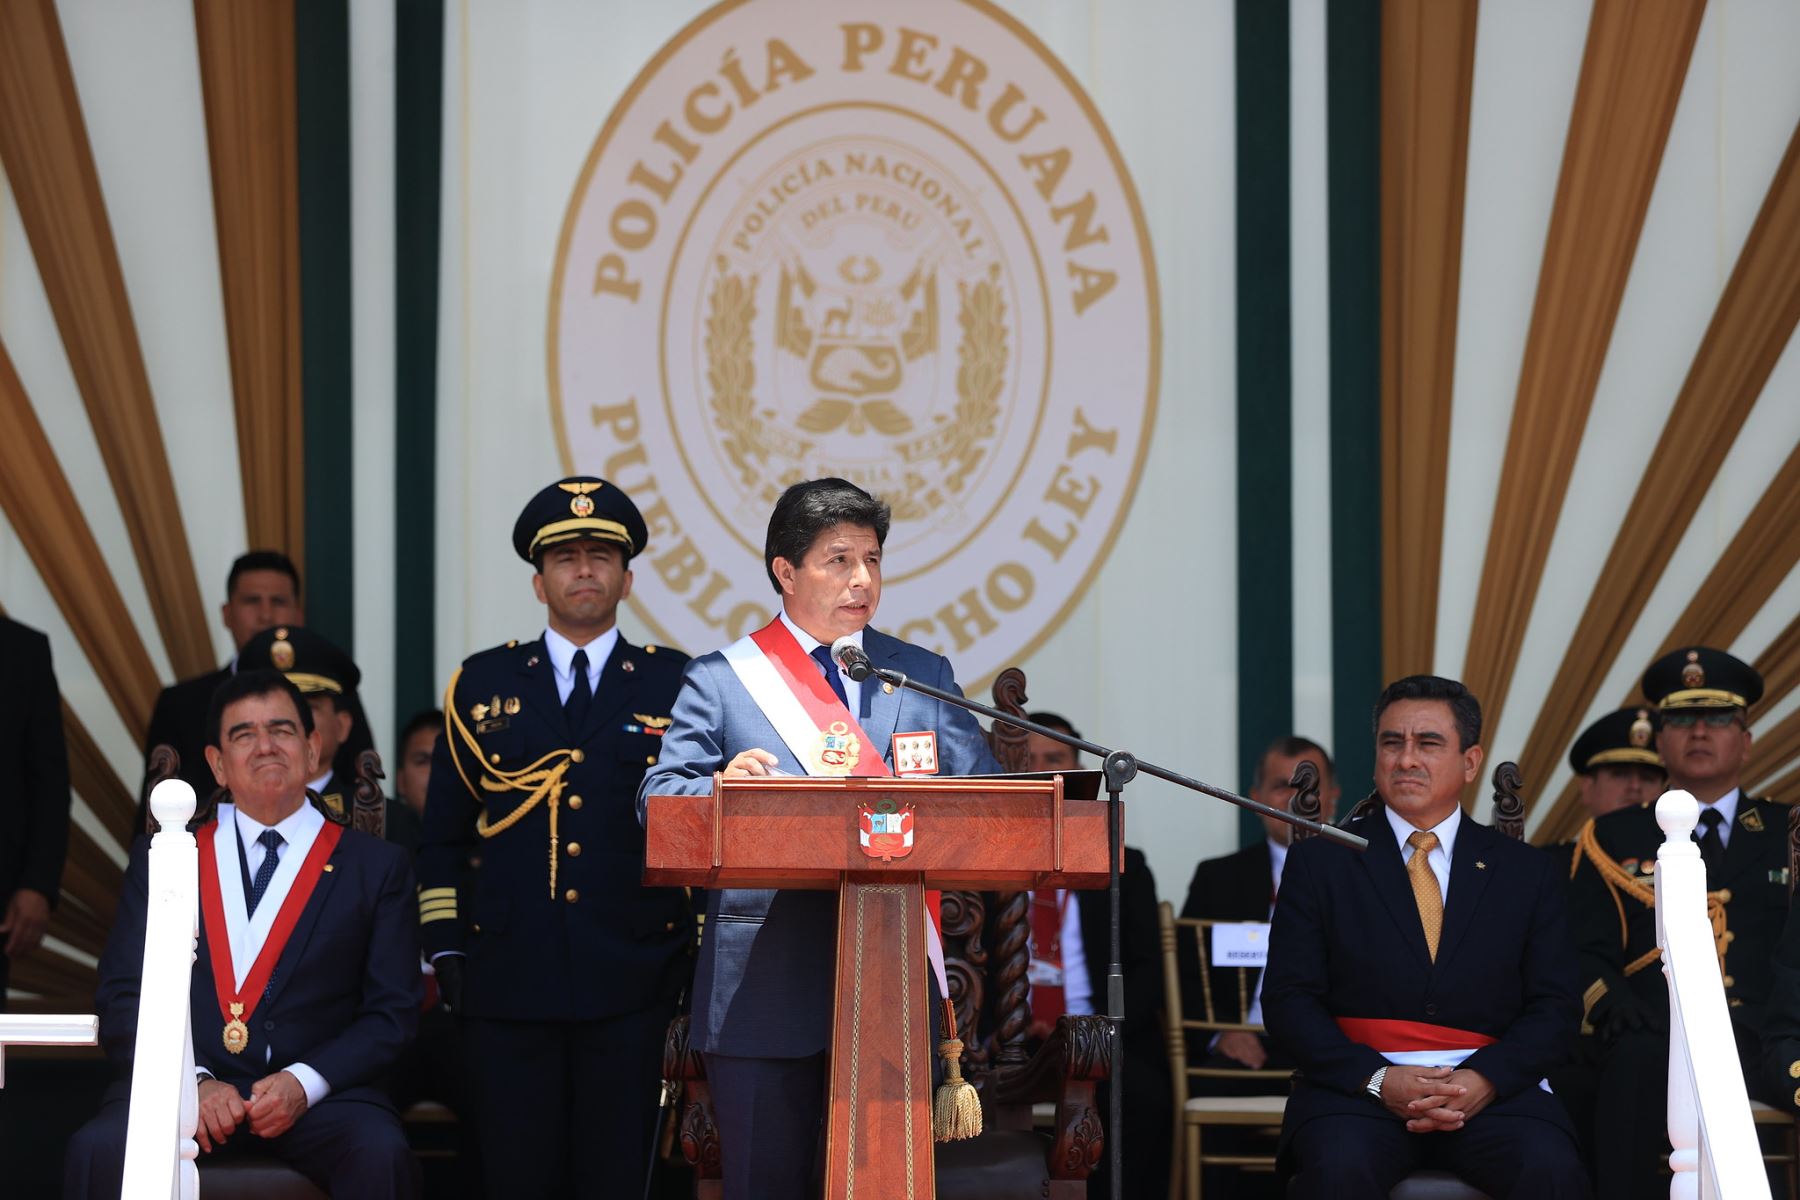 Peru: President rules out corruption, reiterates call for dialogue